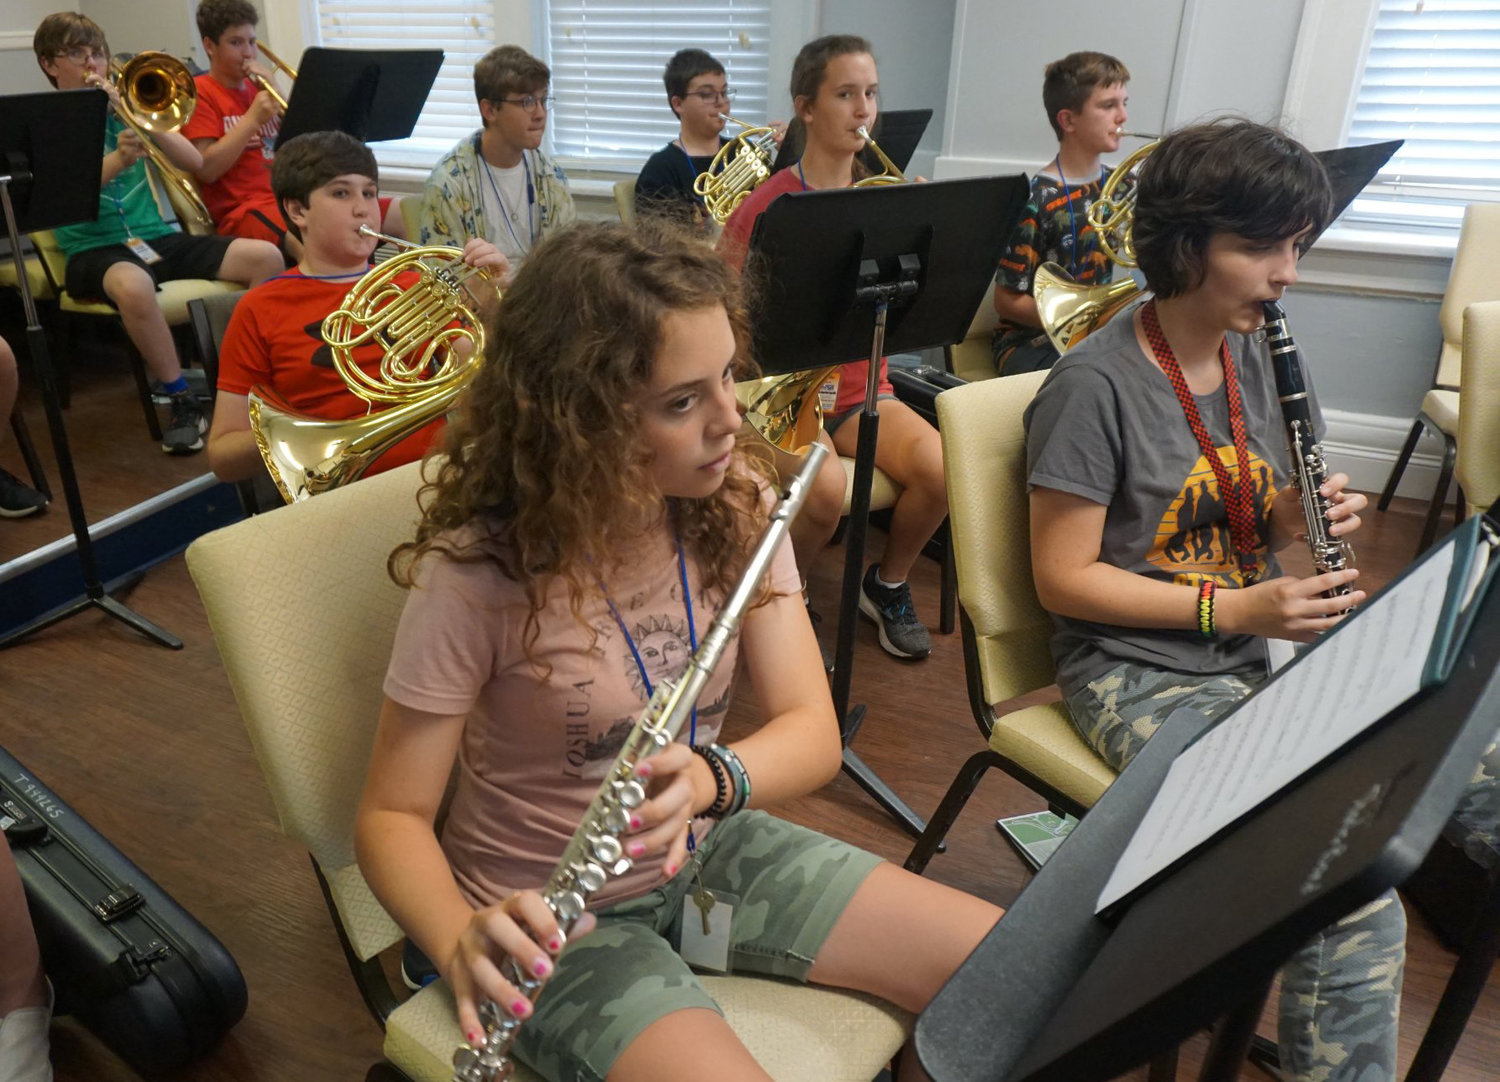 Orchestra students rehearse at Surge150 in Rome, Ga. (Photo/Surge150)